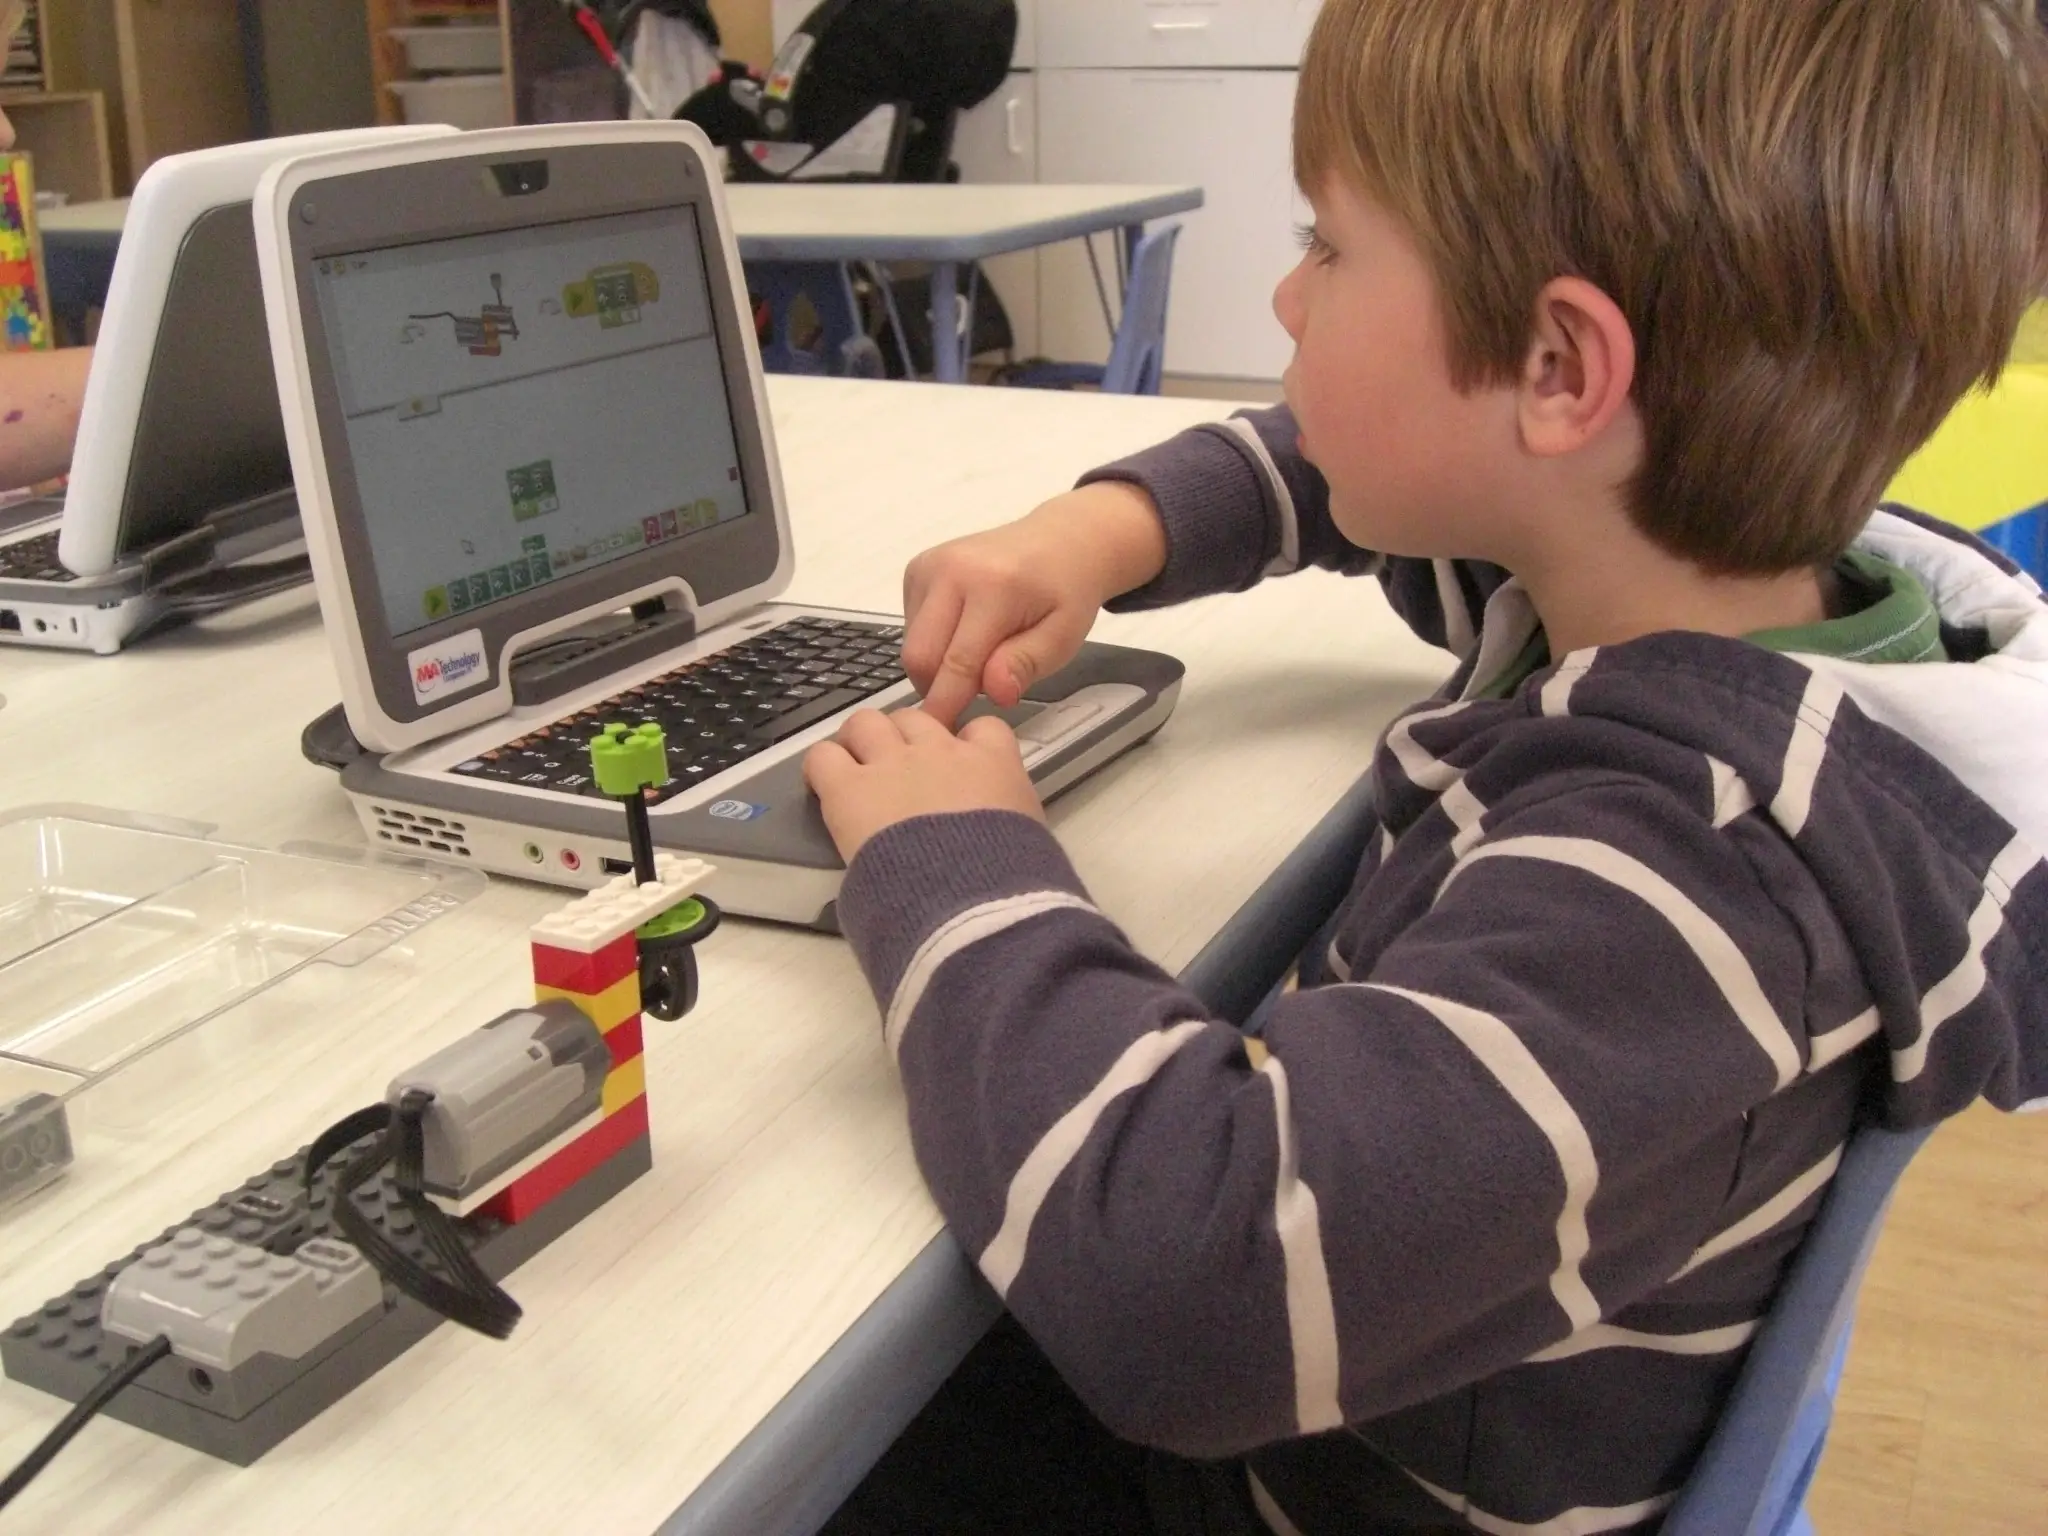 Max Crothall, 6, uses a computer to build and program a robot to move and make sound. Kids can do this at Bricks and Motors in Rye Brook, Westchester.